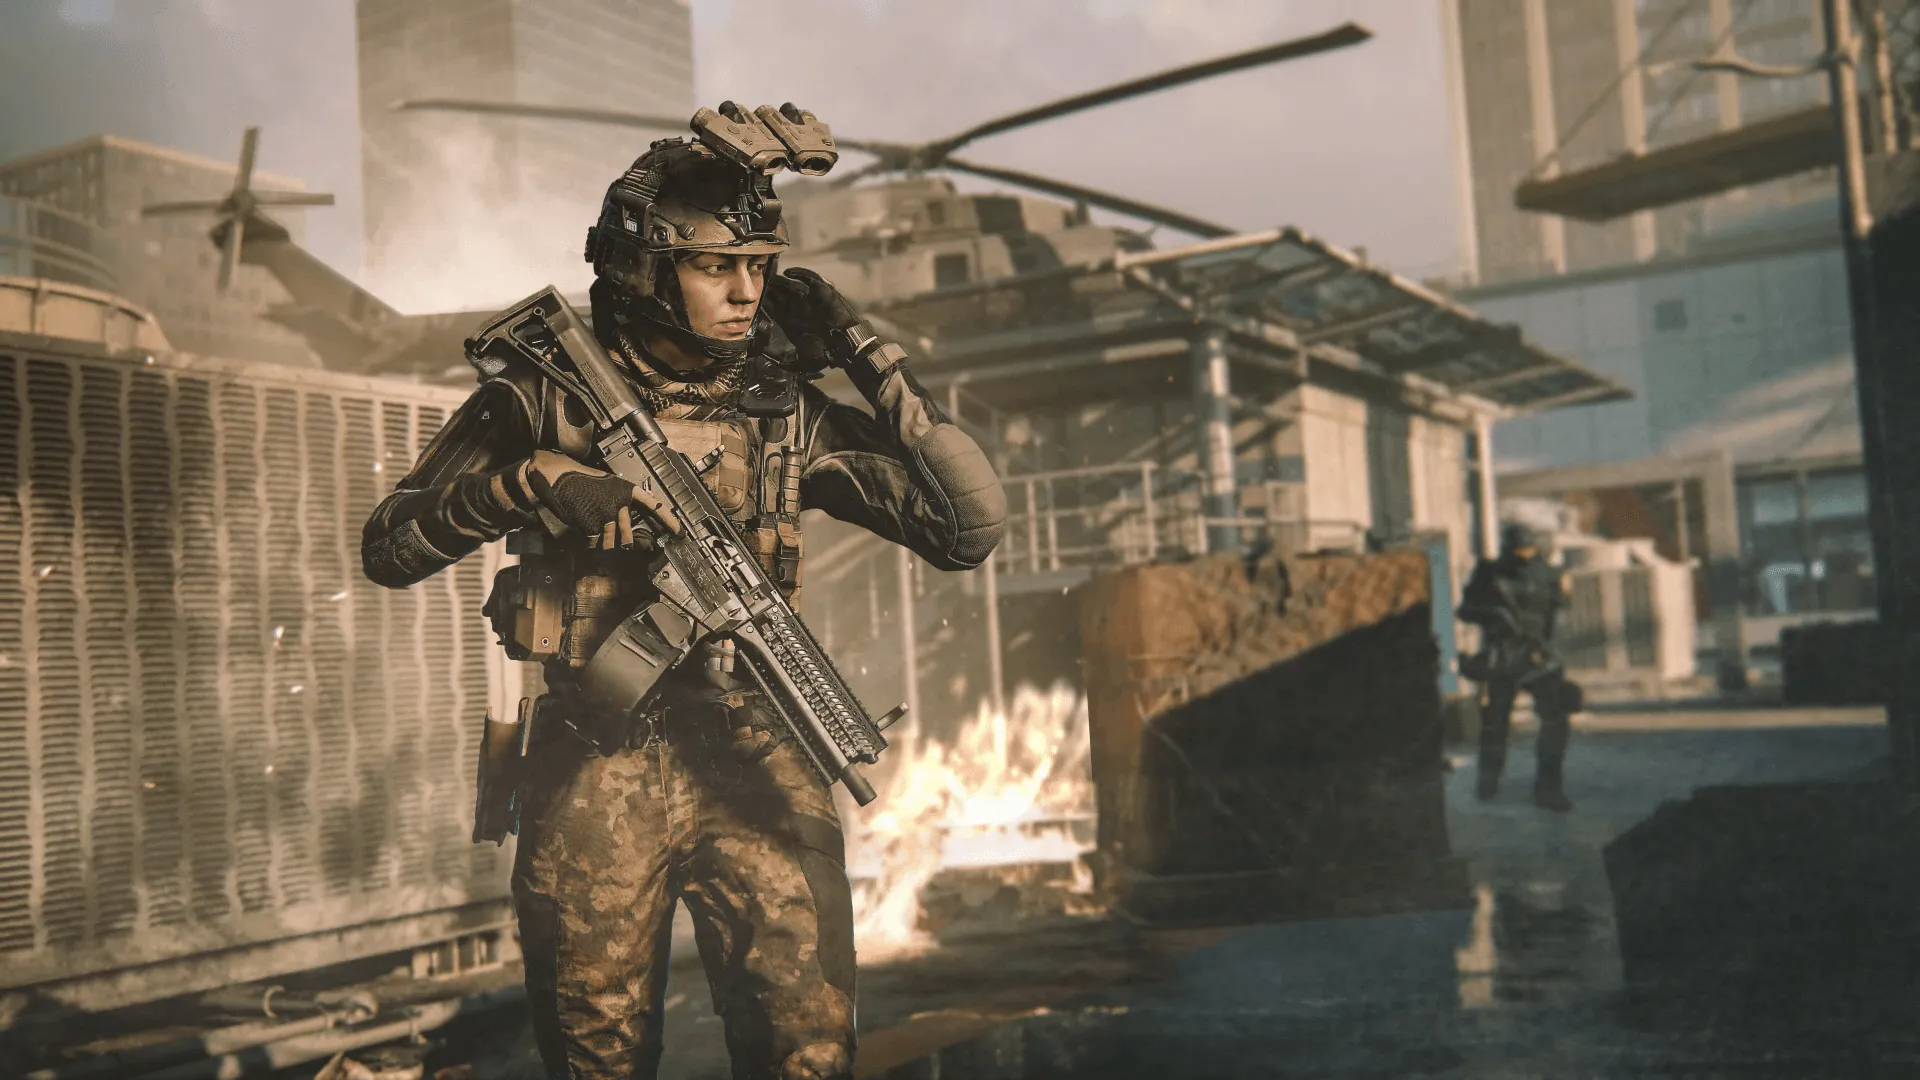 Call of Duty: Modern Warfare 3 launch date and times for preloads